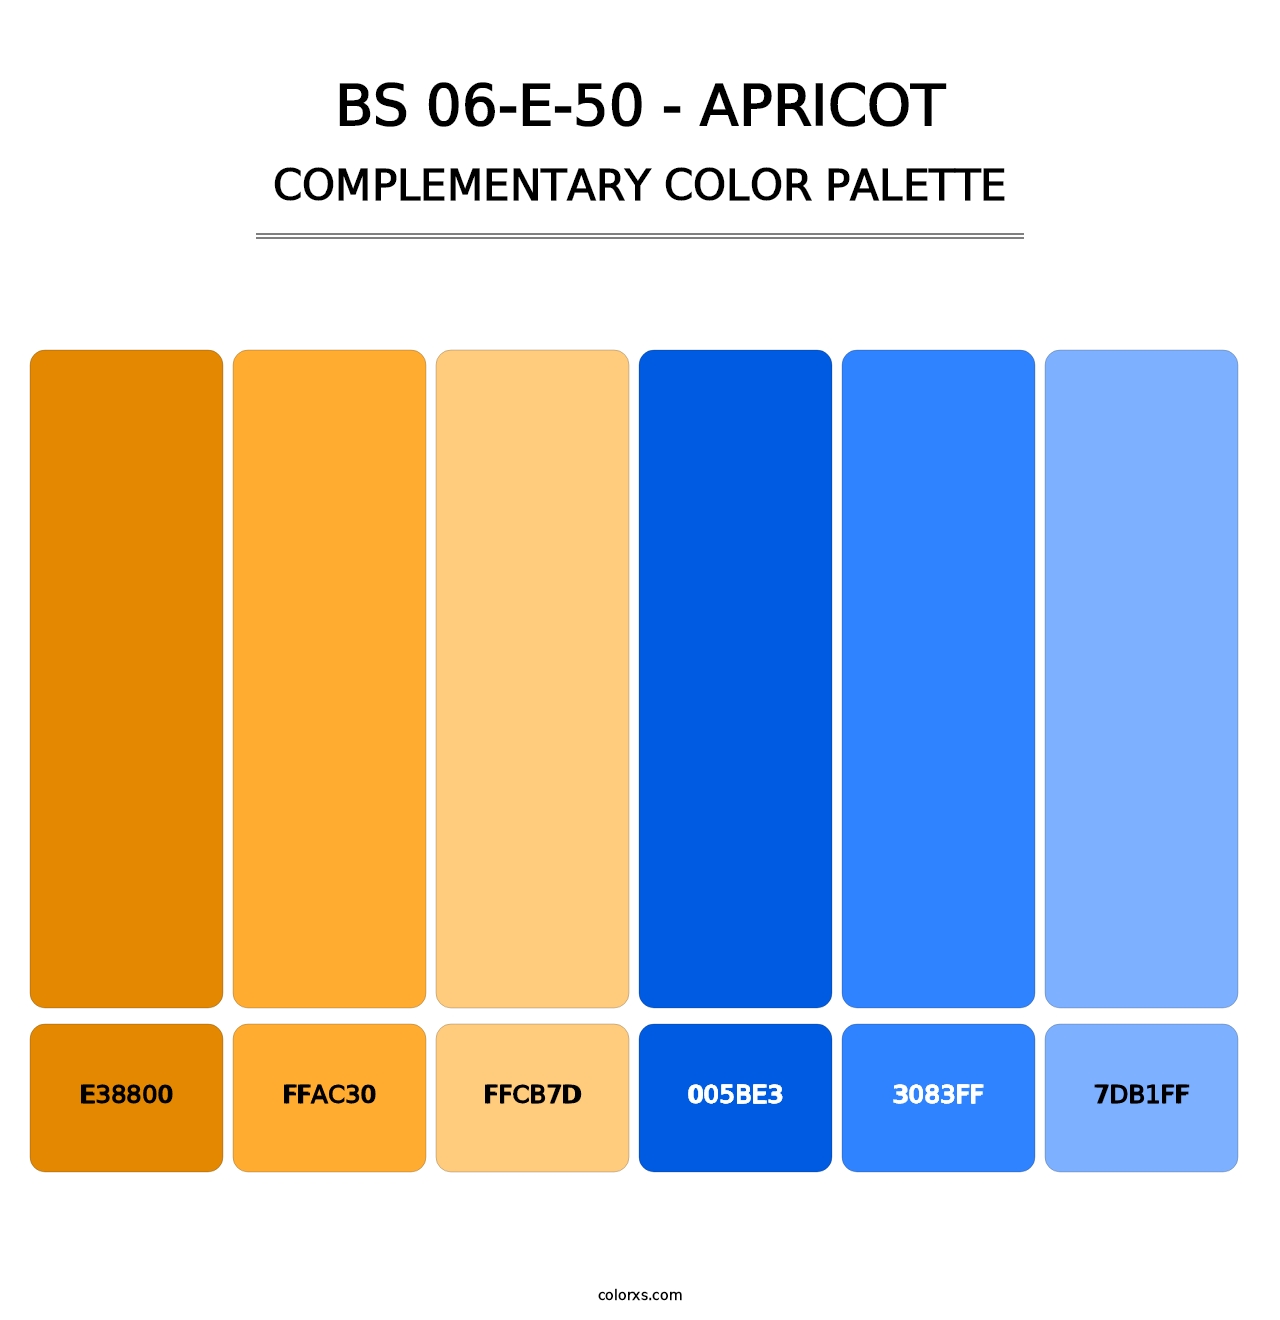 BS 06-E-50 - Apricot - Complementary Color Palette